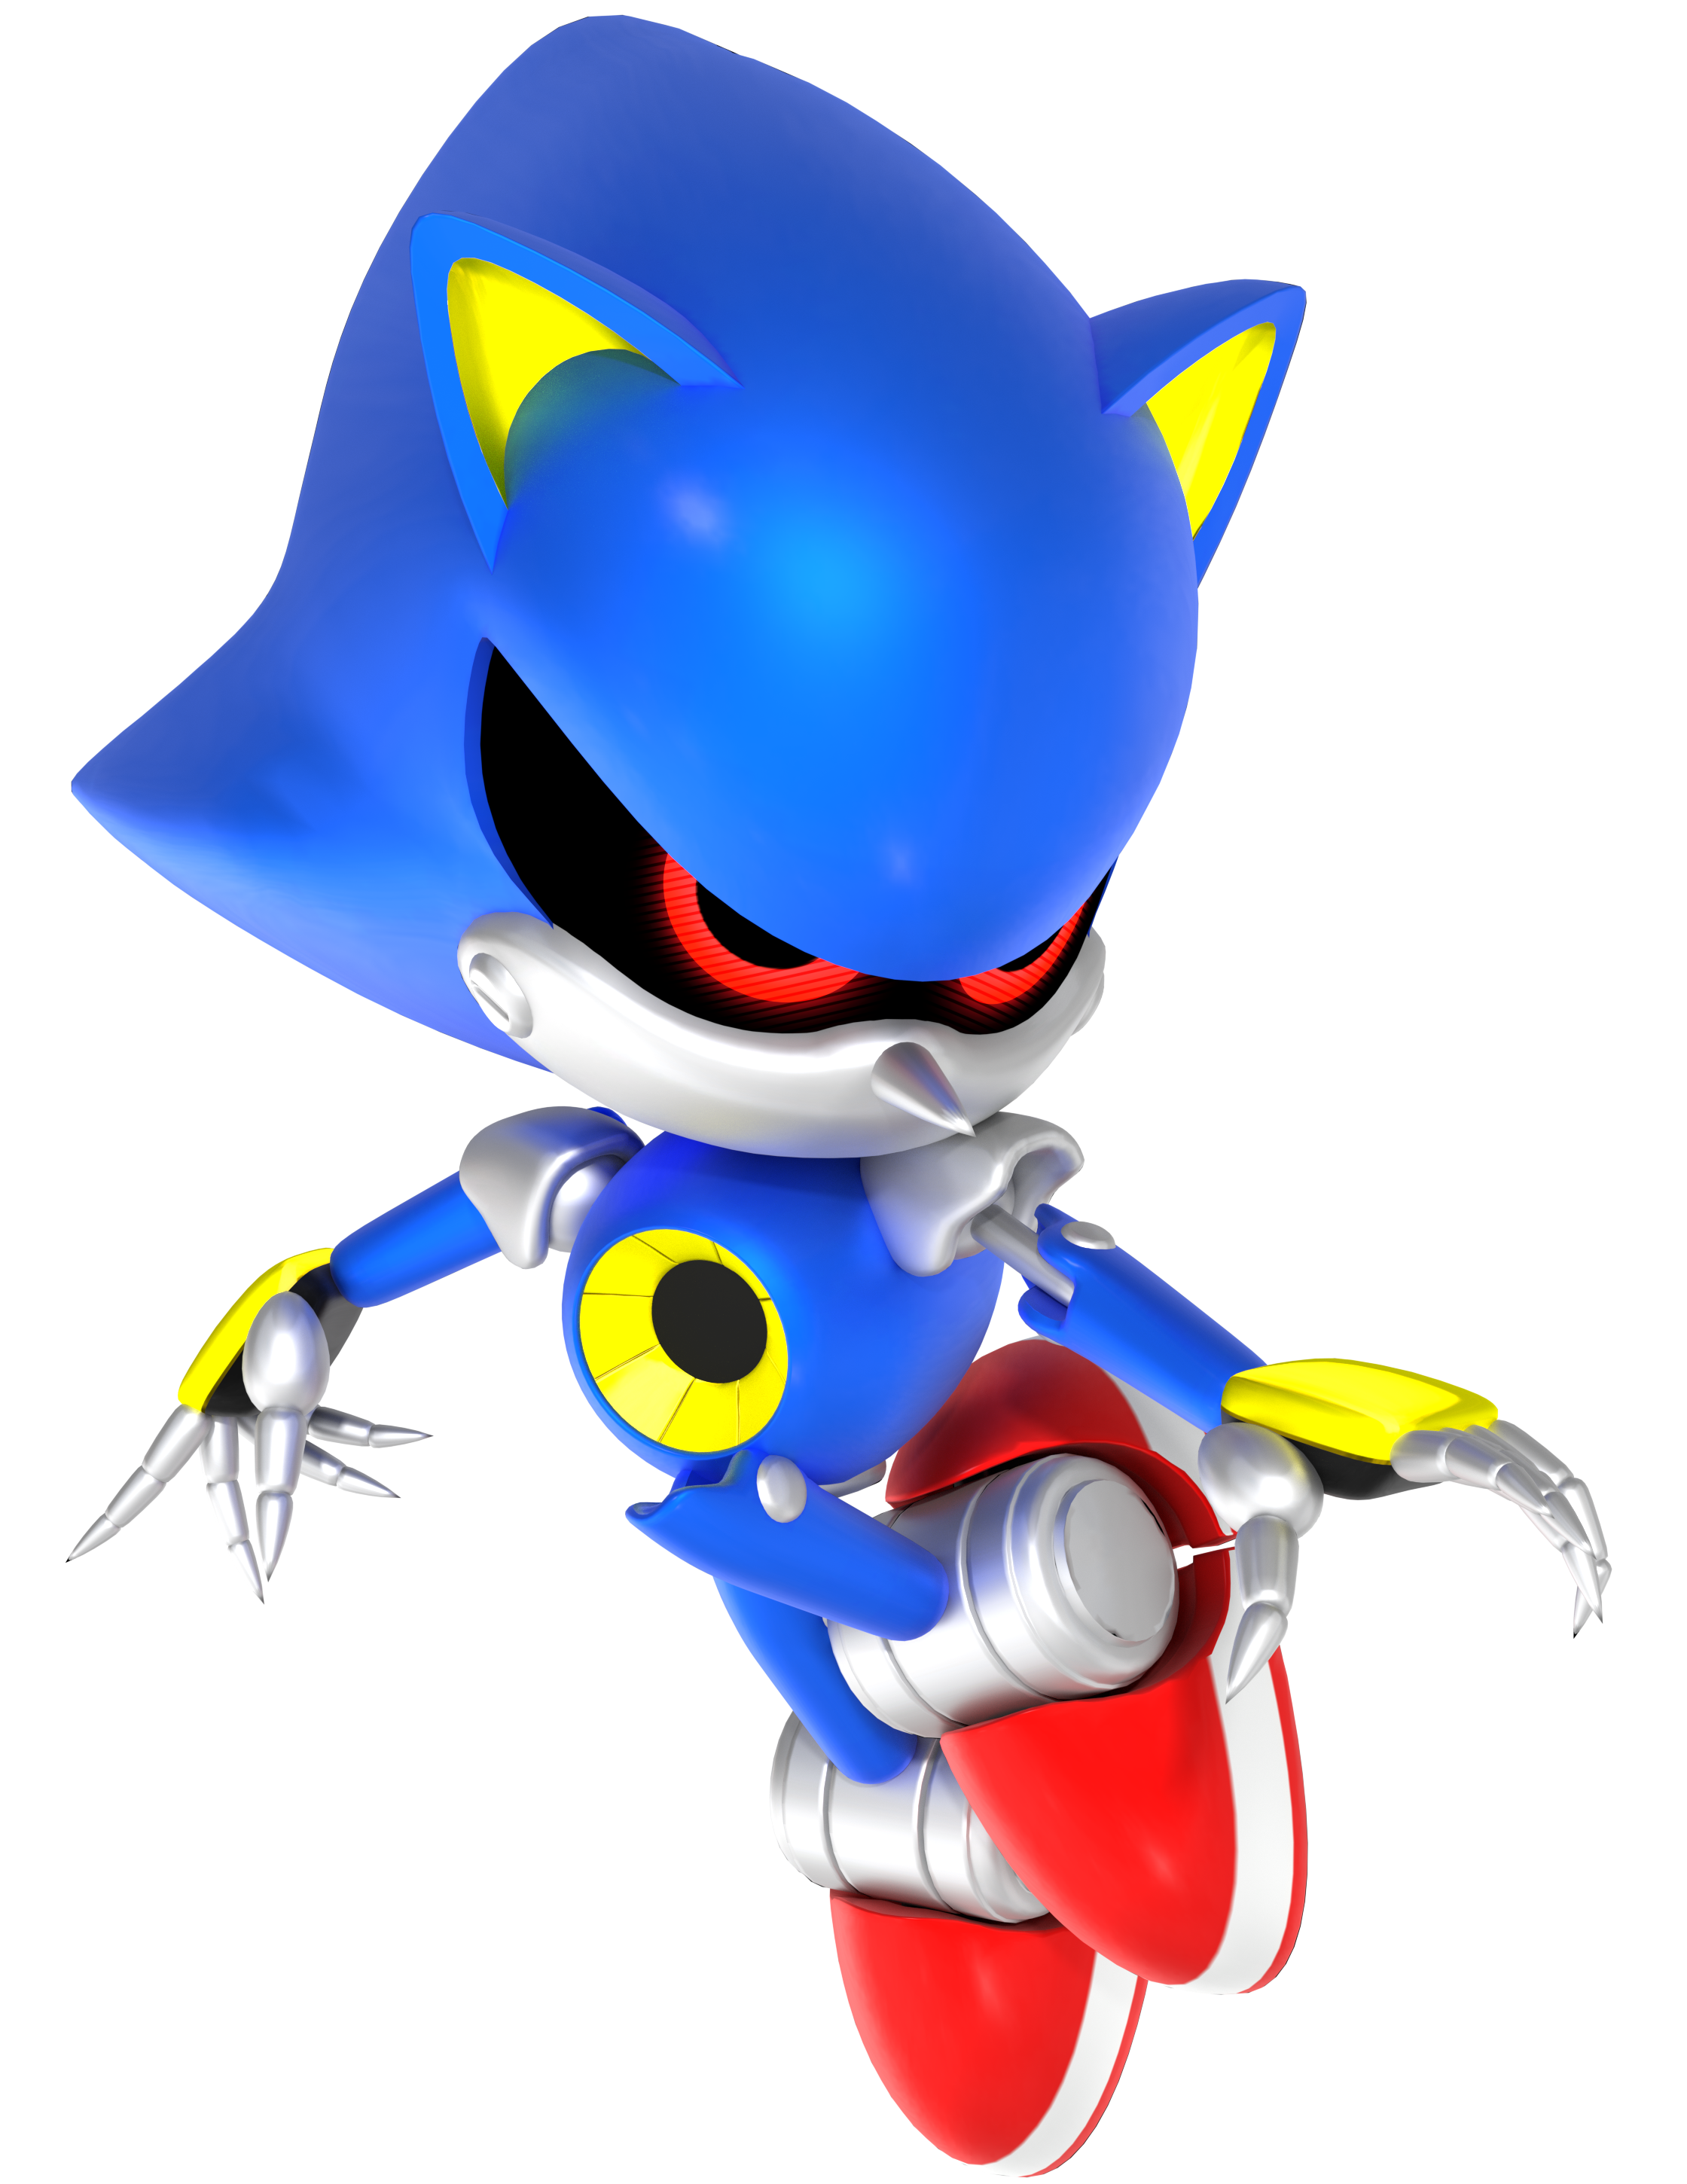 MORE Classic Metal Sonic by JaysonJeanChannel on DeviantArt